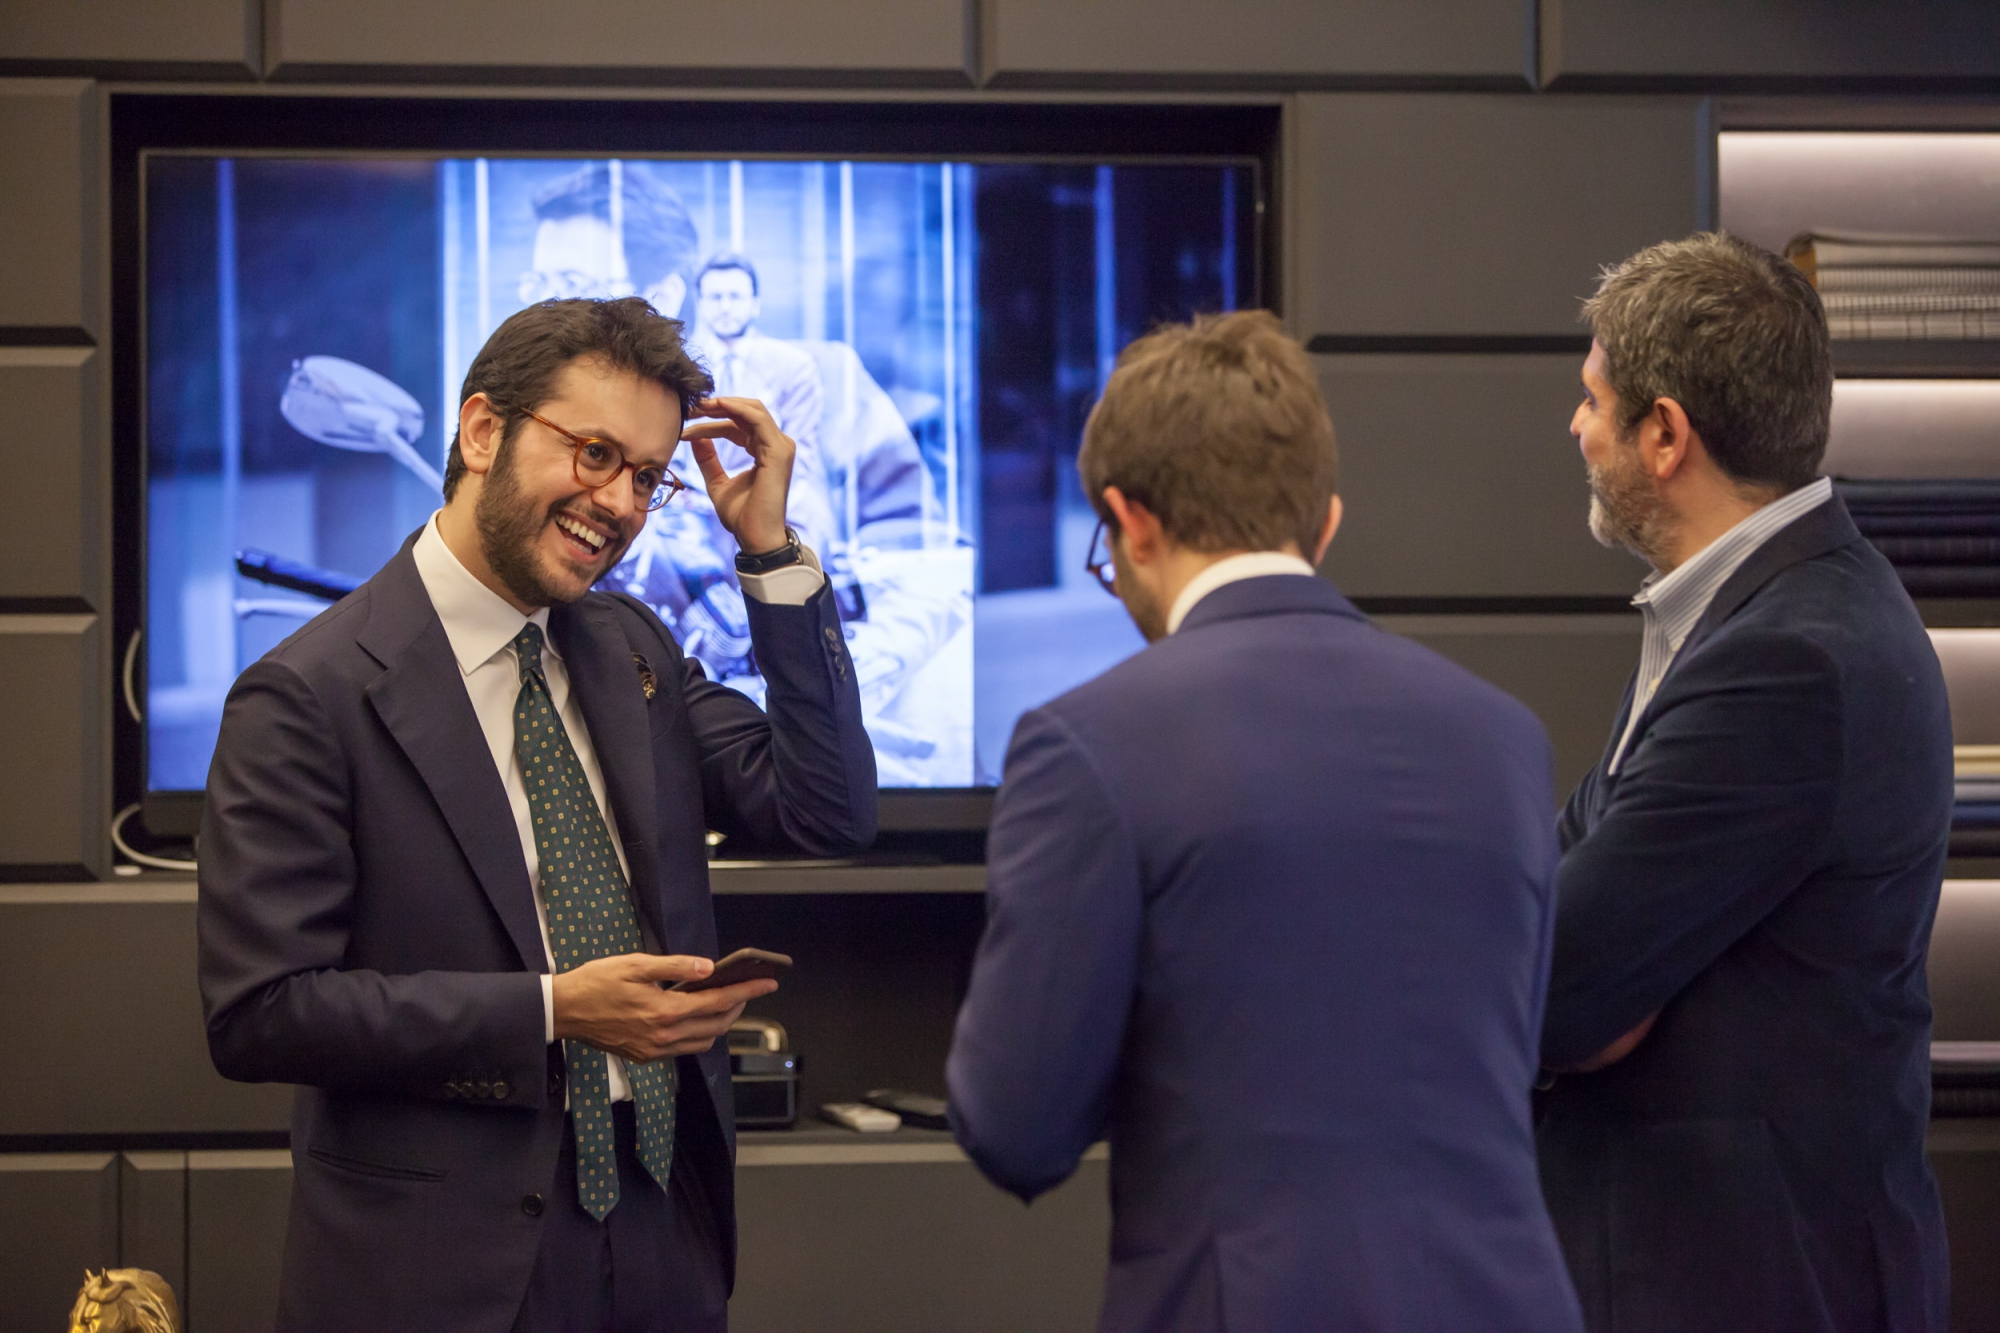 A conversation with... me A brief video from my conference at VBC Showroom in Milan